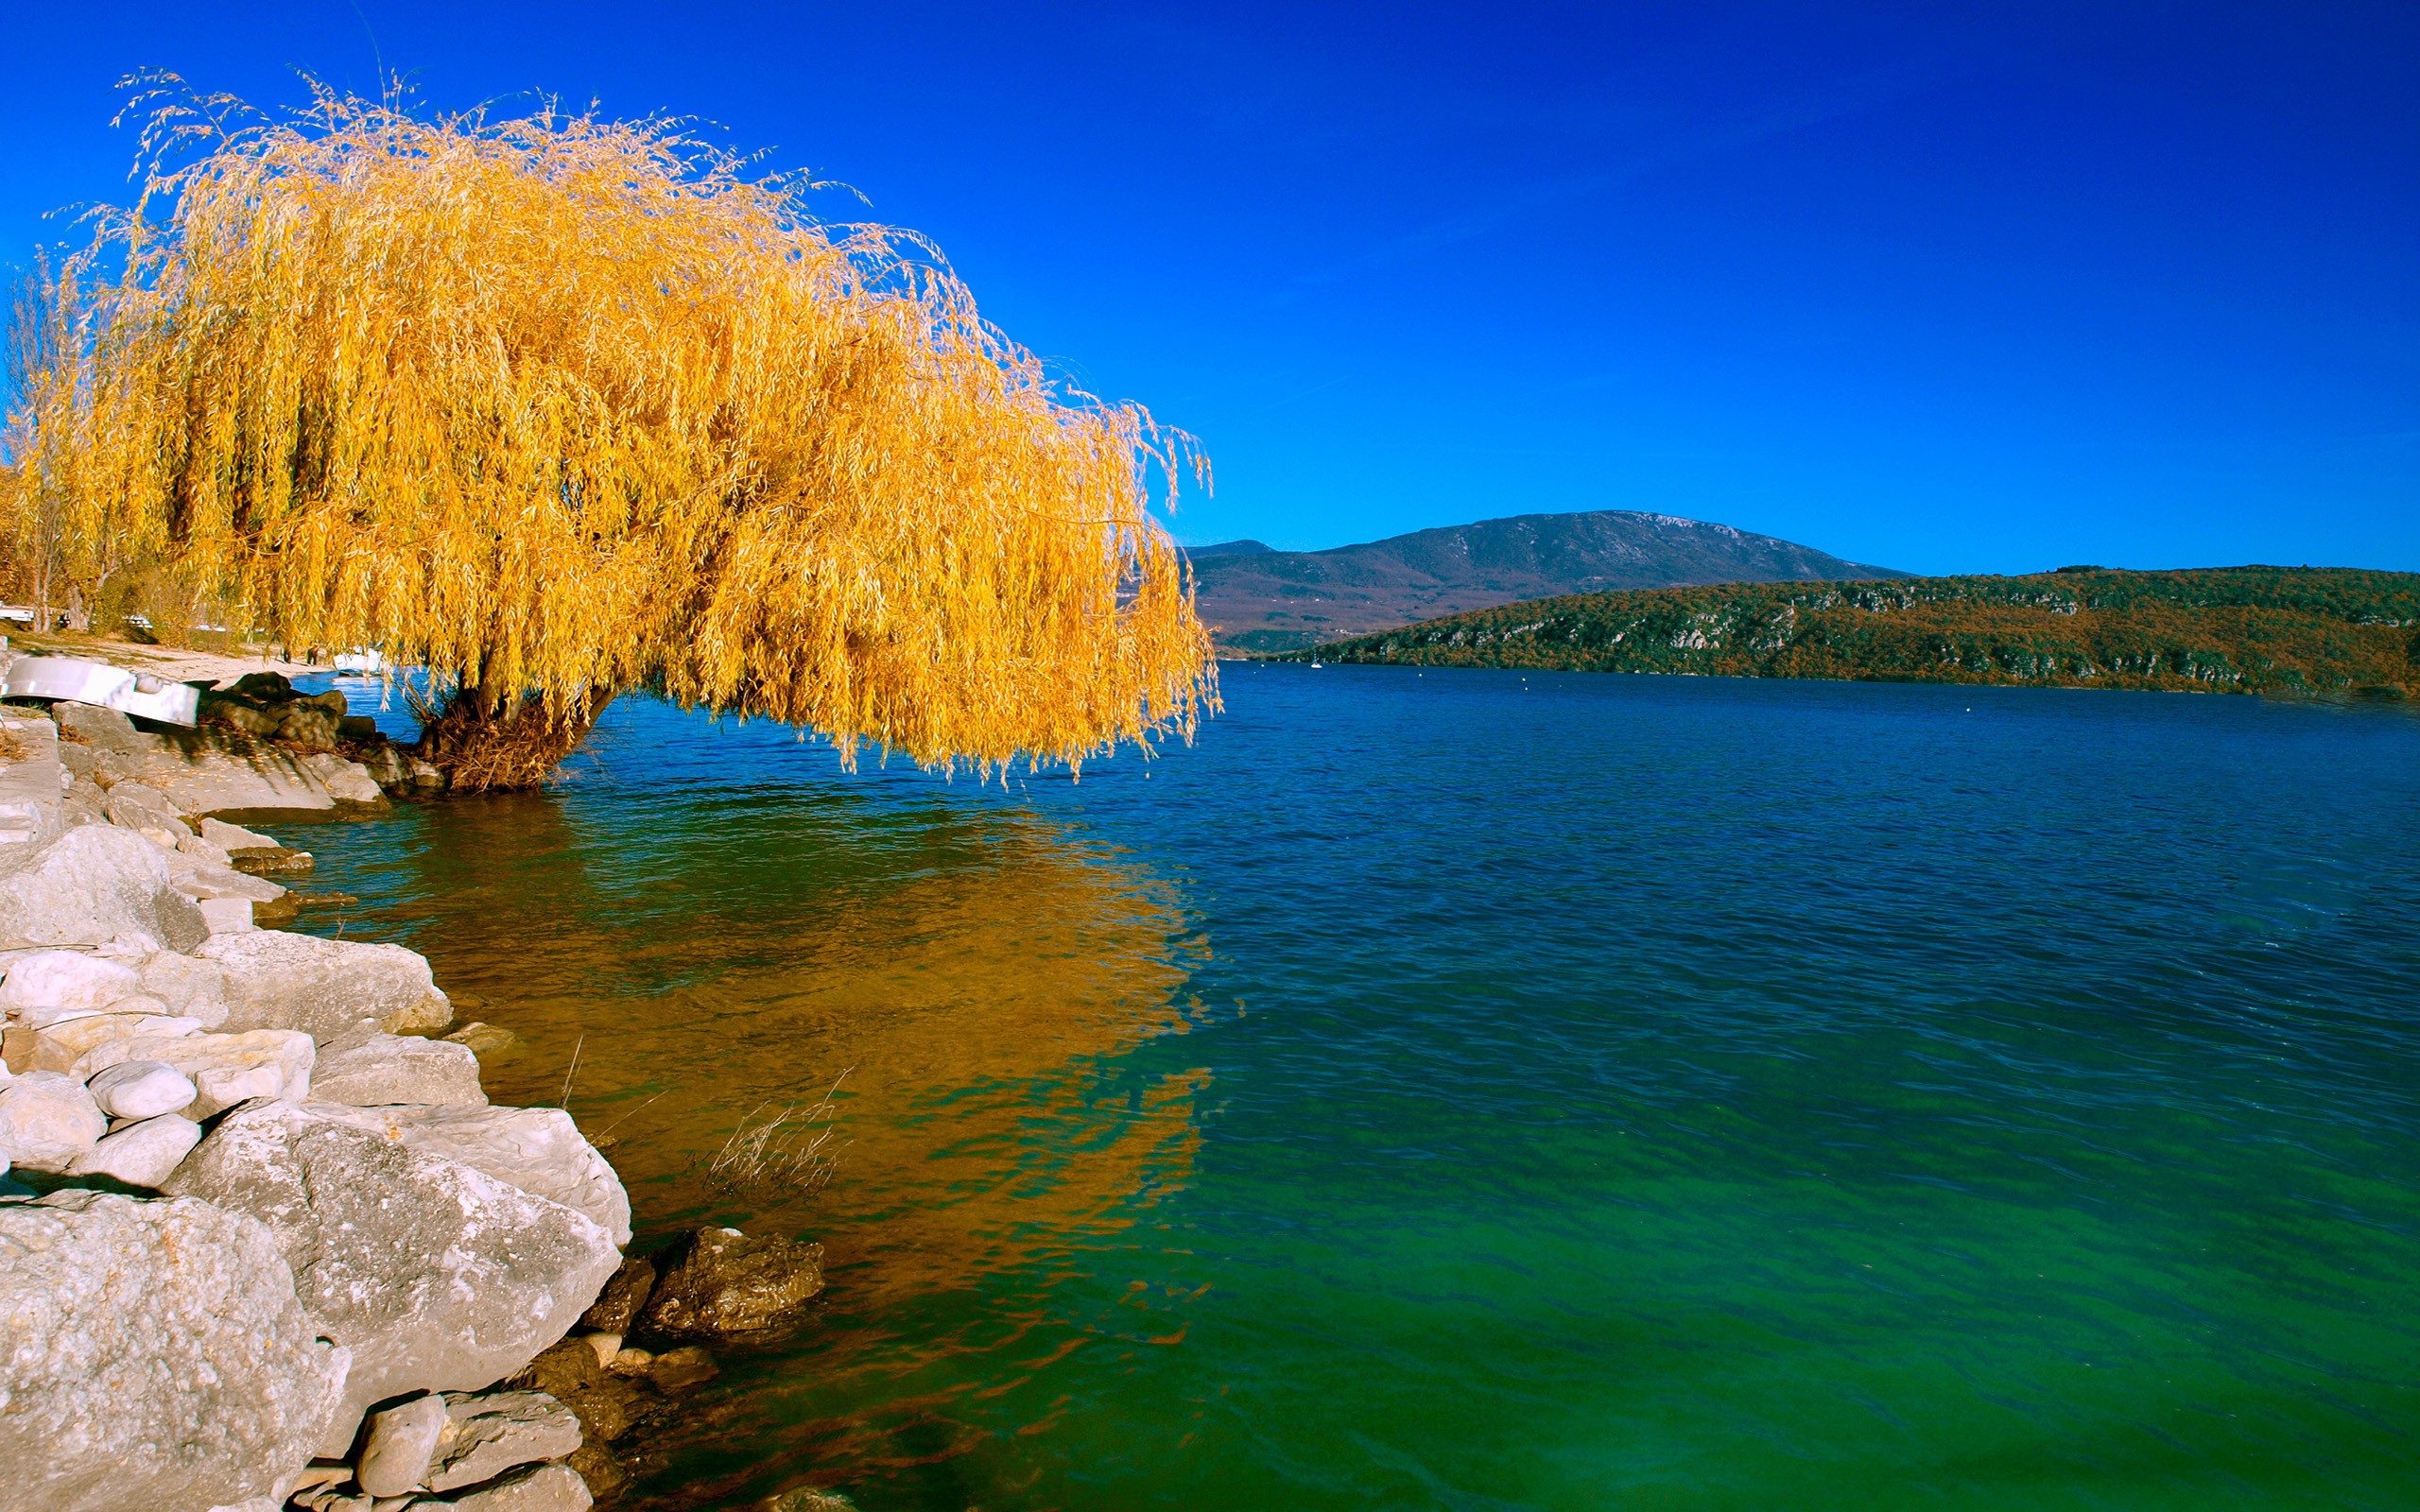 Yellow Willow Tree In Lack HD Wallpaper New